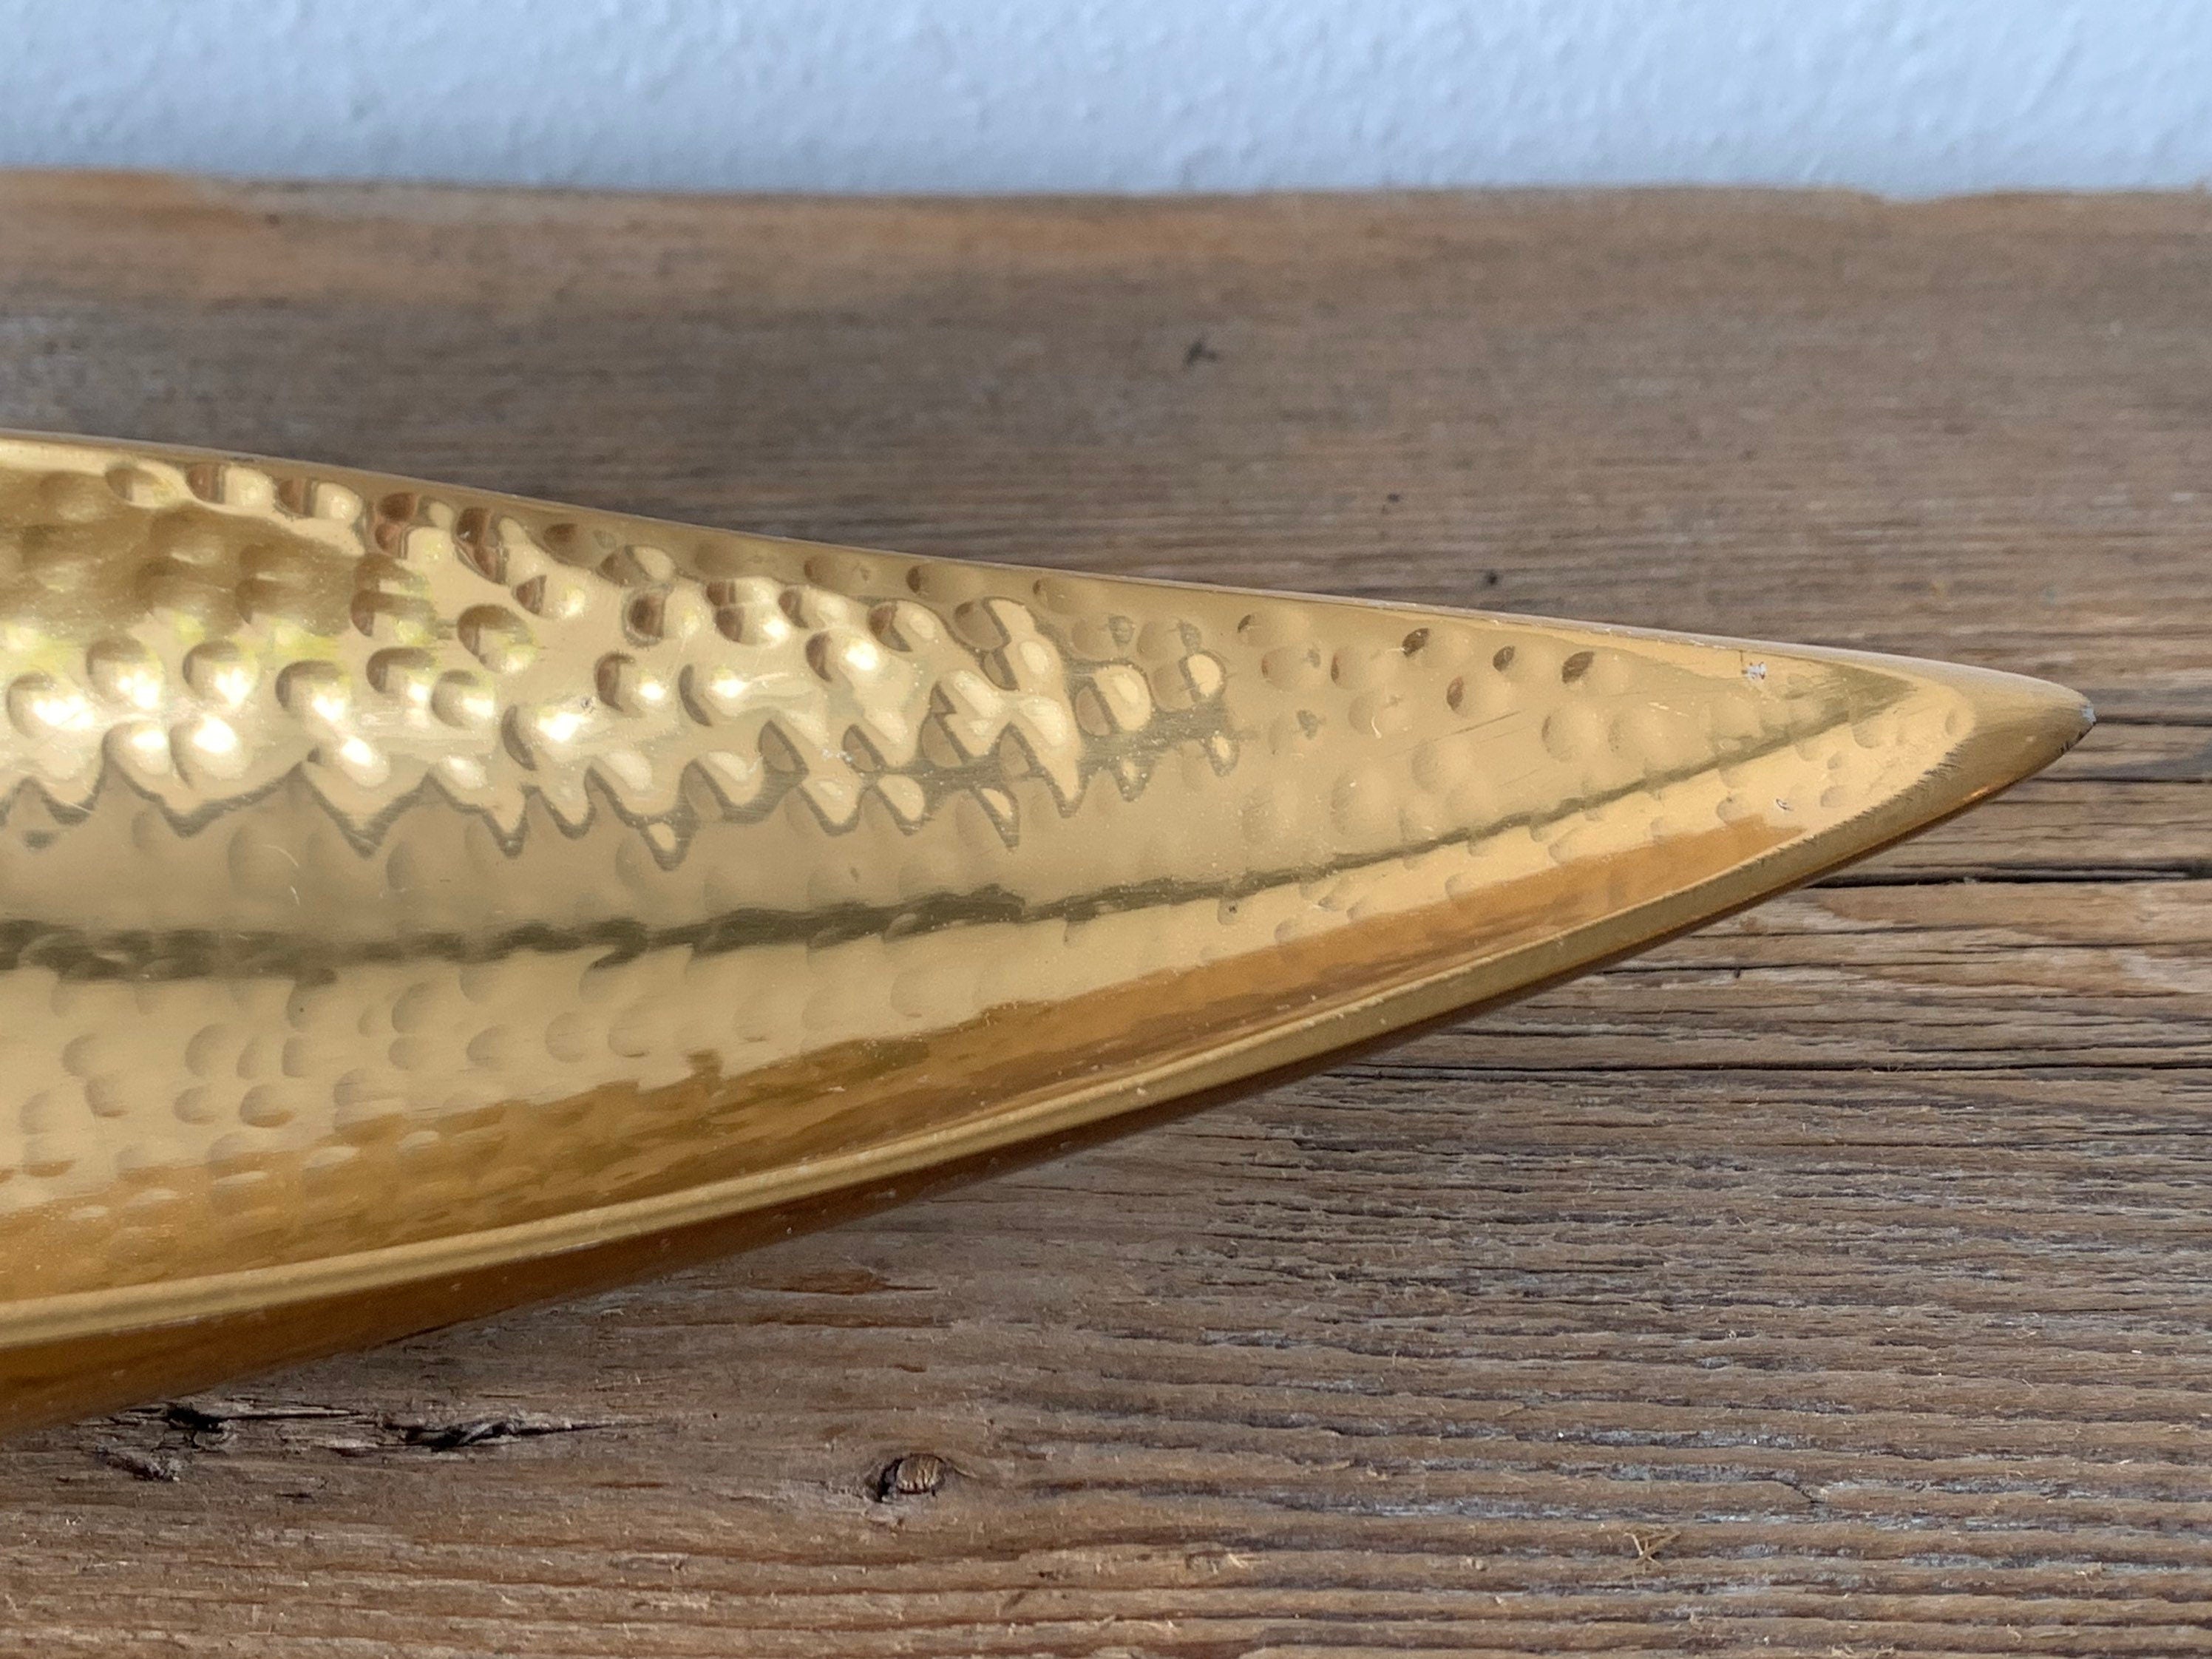 Vintage Gold Tone Slender Leaf Shaped Serving Tray | Hammered Metal Serveware, Jewelry Dish, Trinket Tray, Catchall Plate